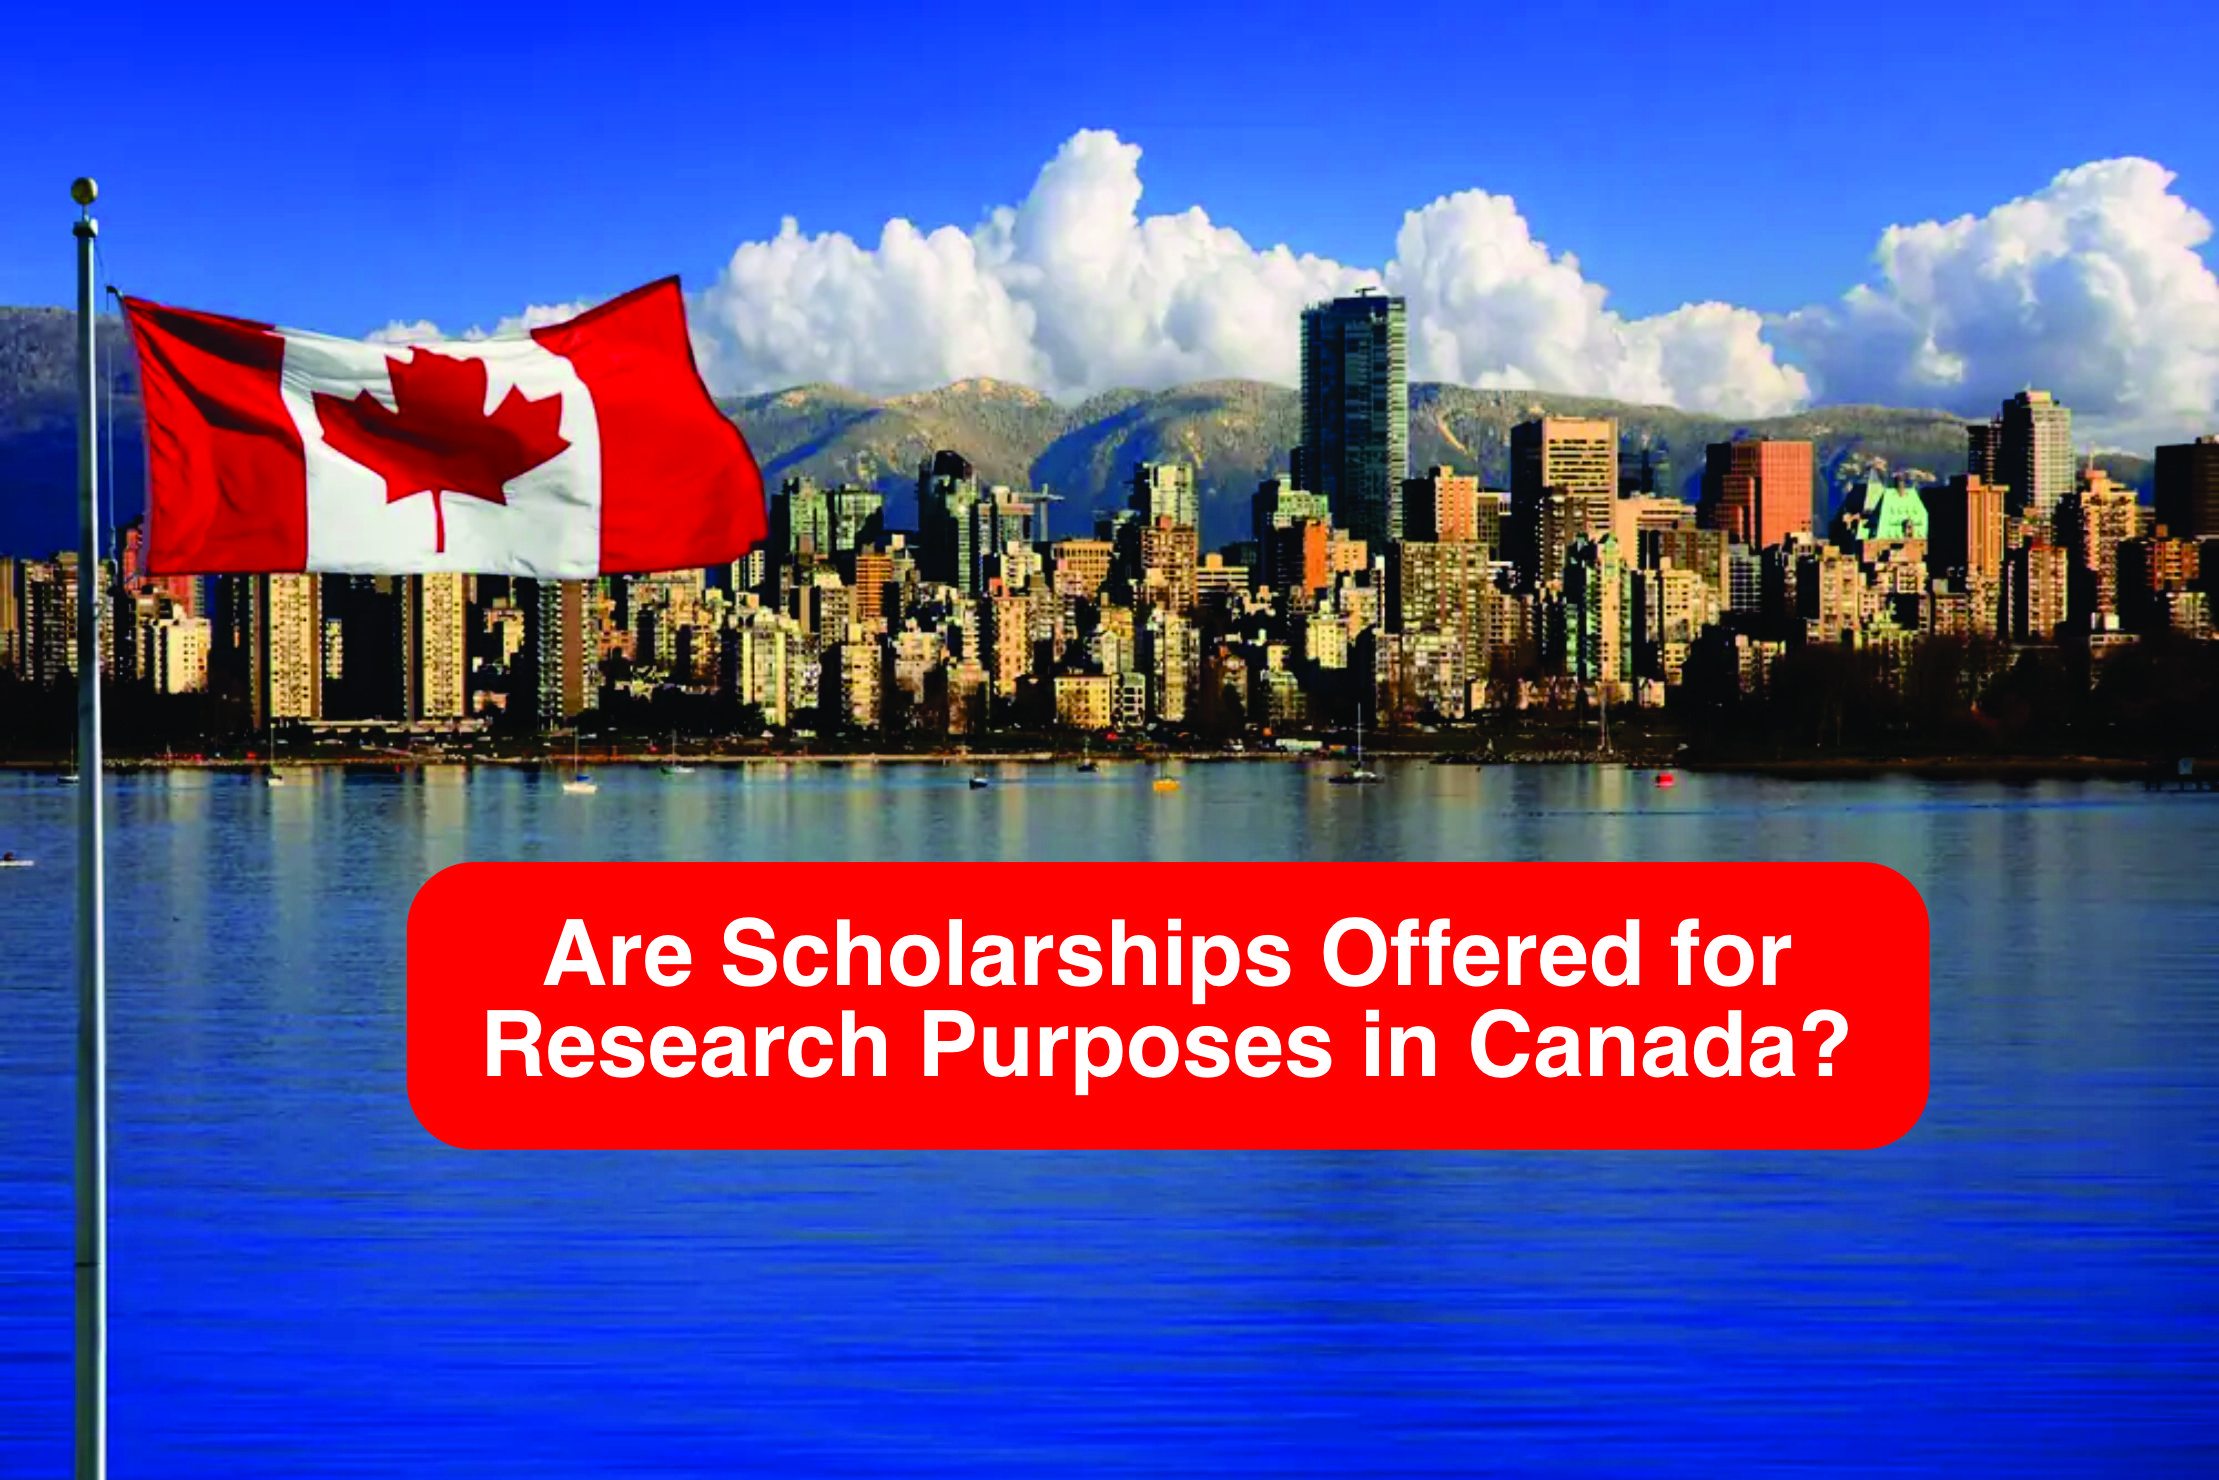 Are Scholarships Offered for Research Purposes in Canada?